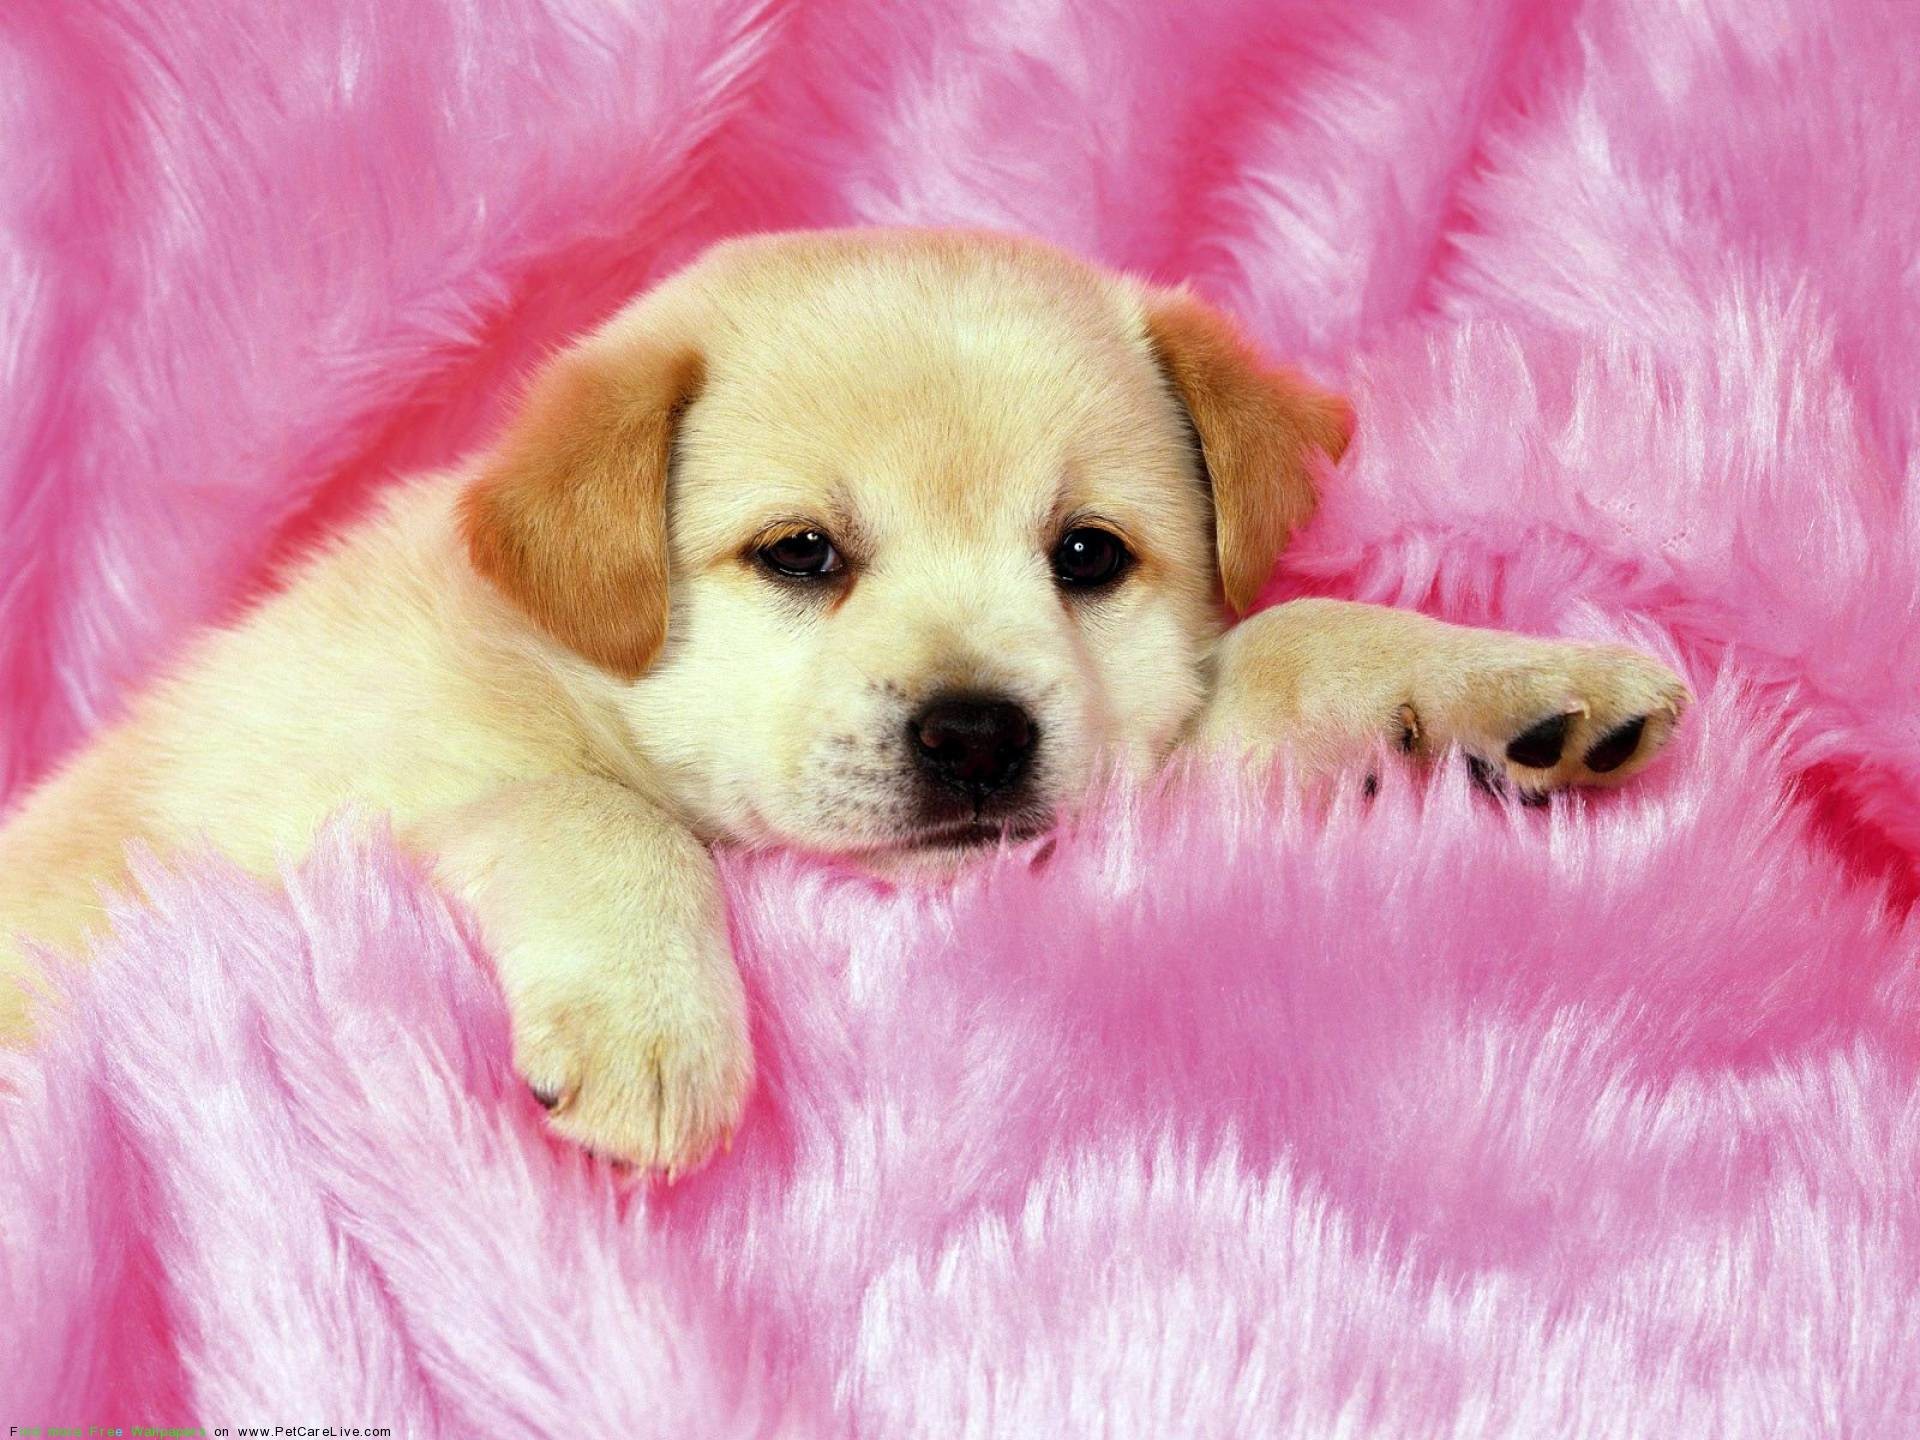 1920x1440 Cute baby dogs wallpaper - photo#24